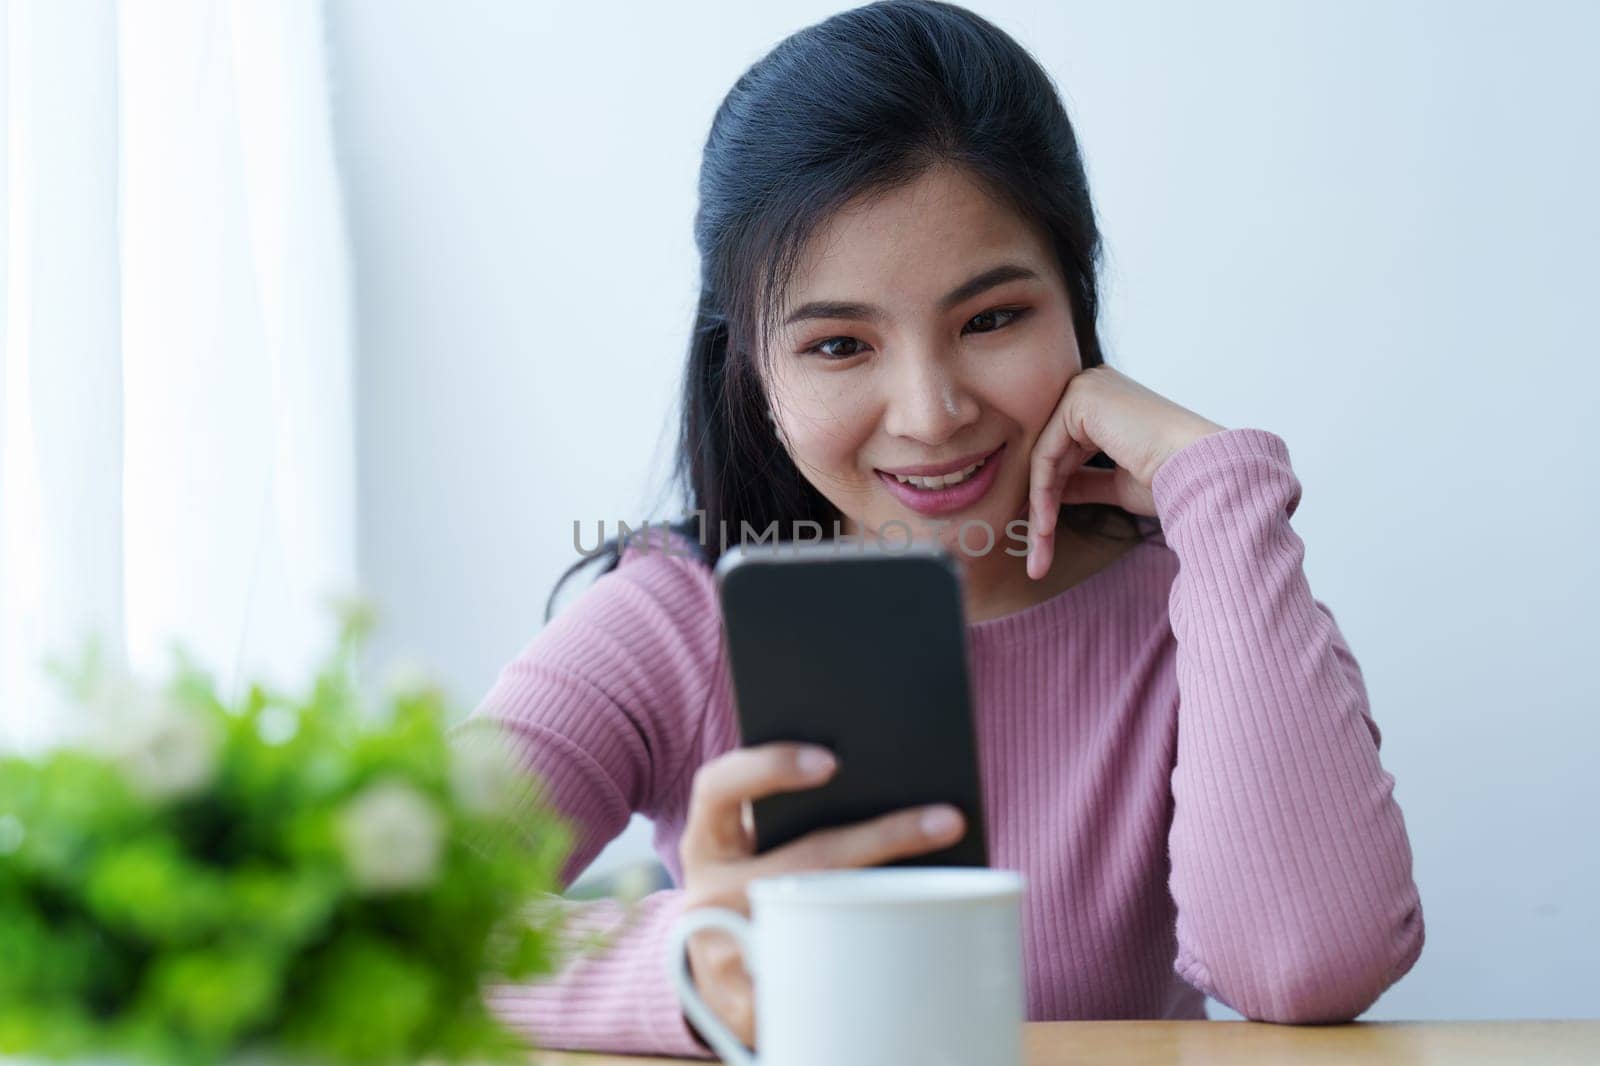 Portrait of a beautiful Asian teenage girl using a smartphone mobile.